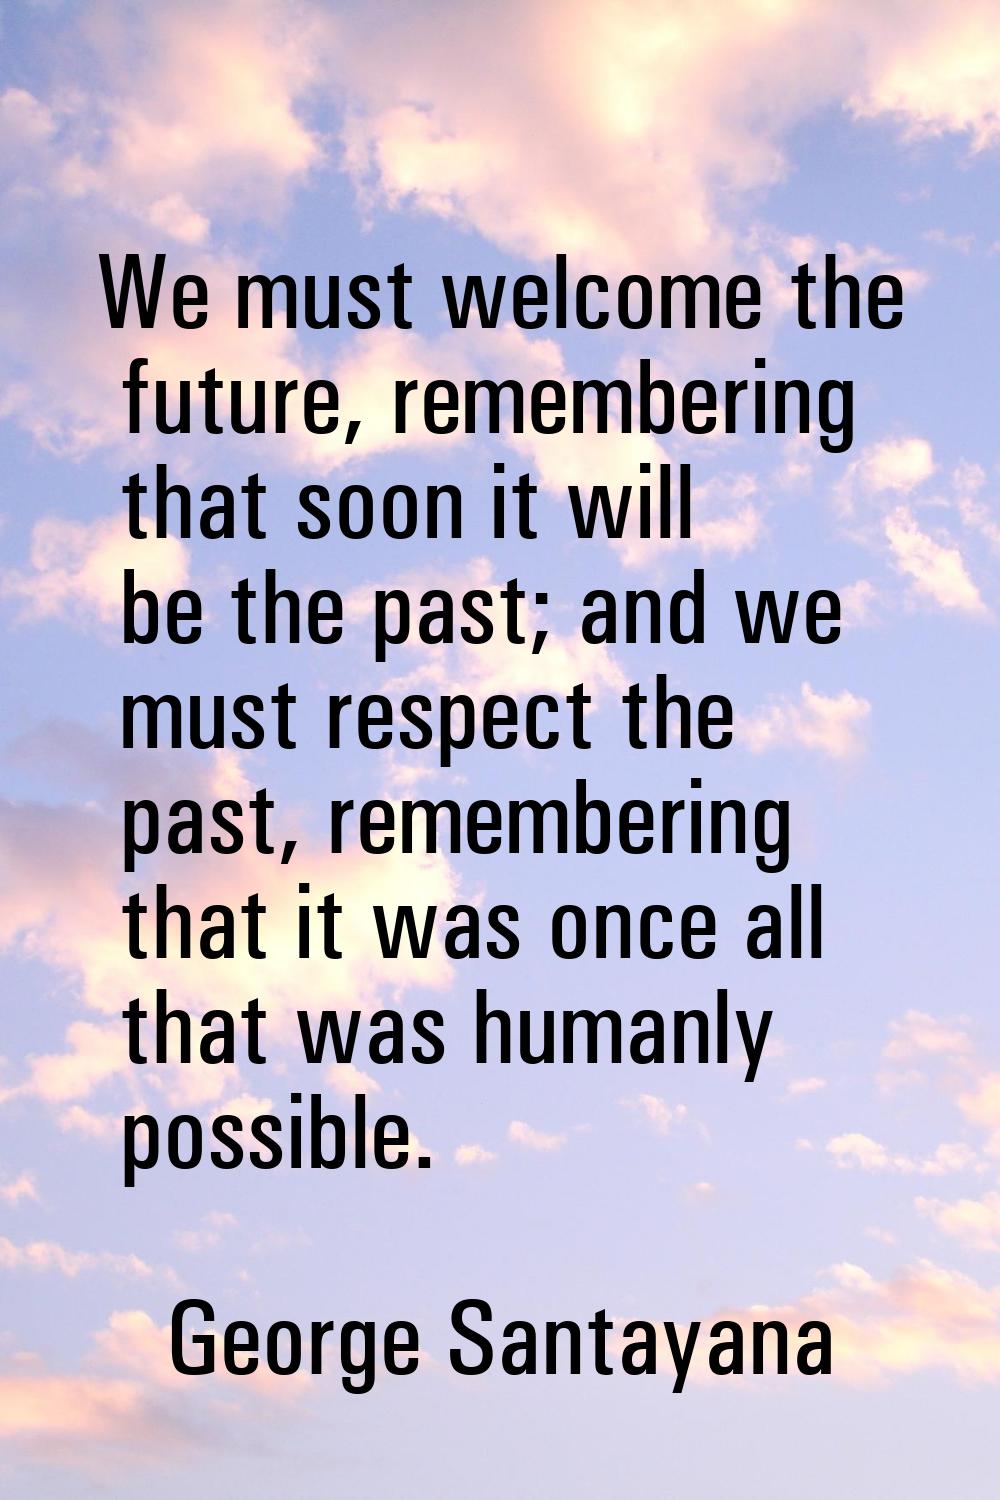 We must welcome the future, remembering that soon it will be the past; and we must respect the past